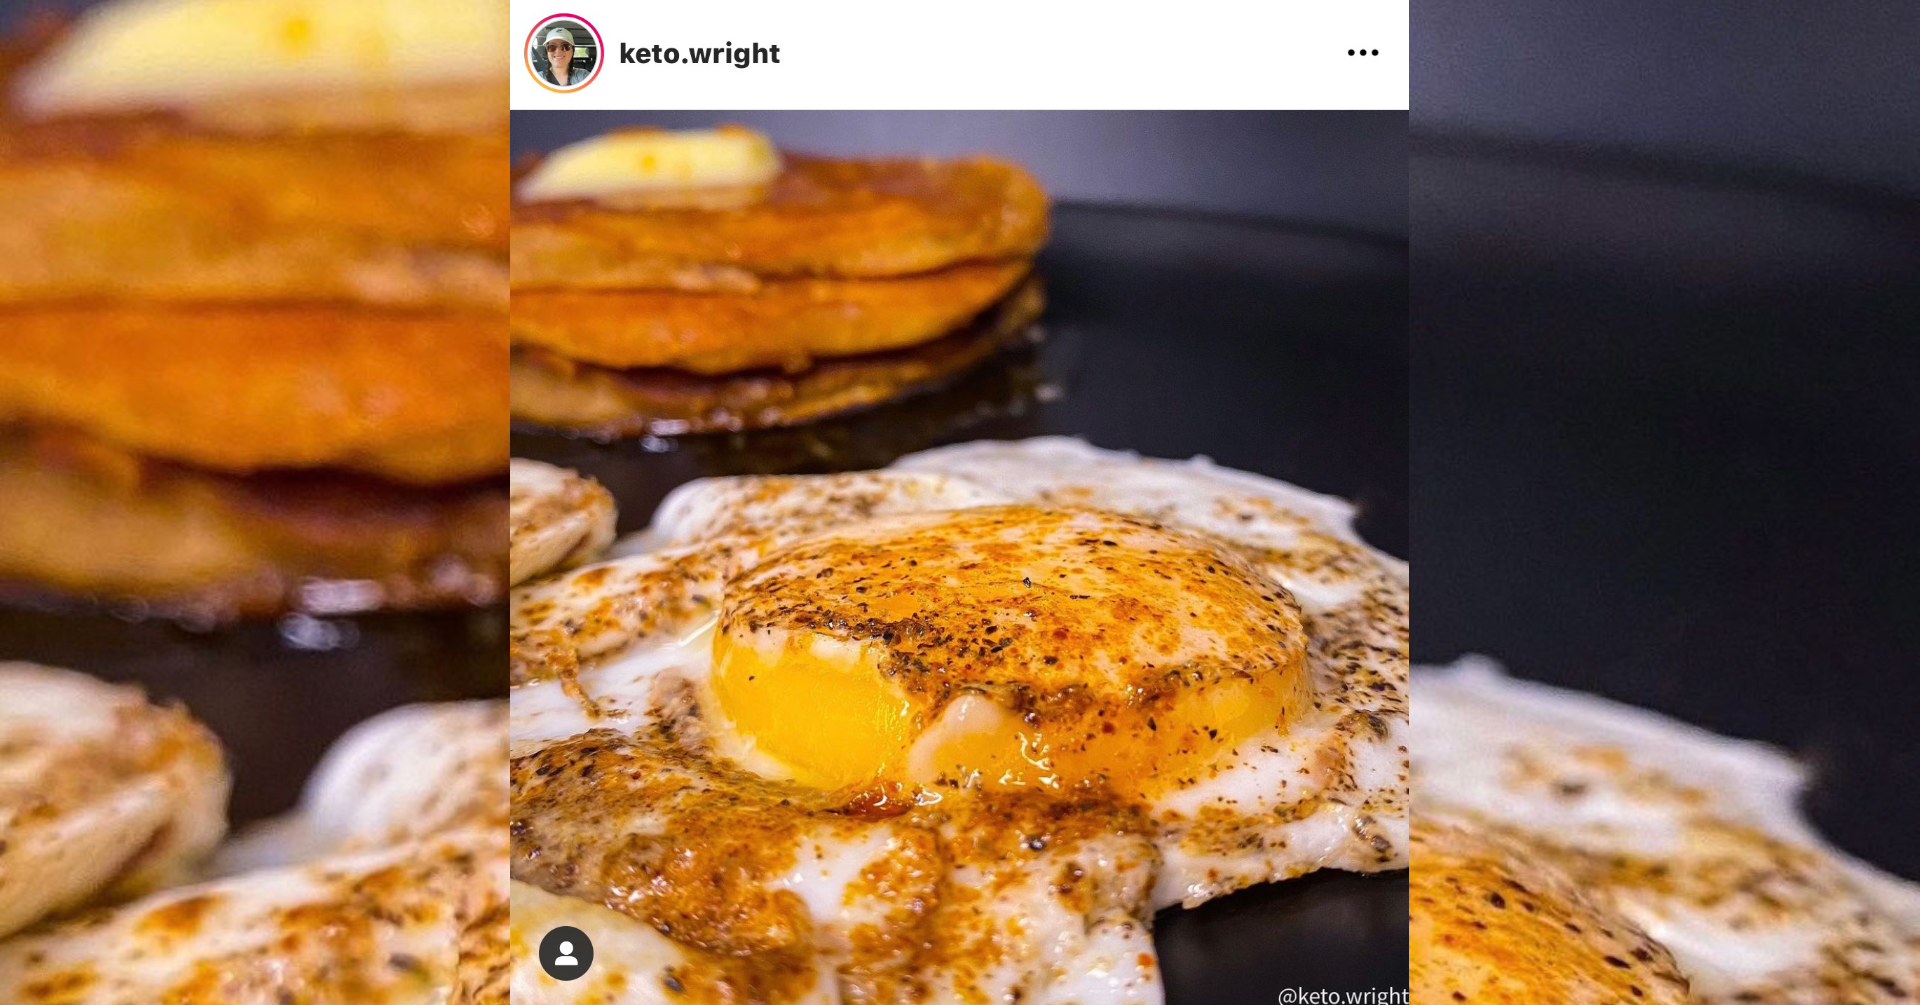 Keto Wright Loving Her RxSugar Maple Syrup On Her Breakfast Stack